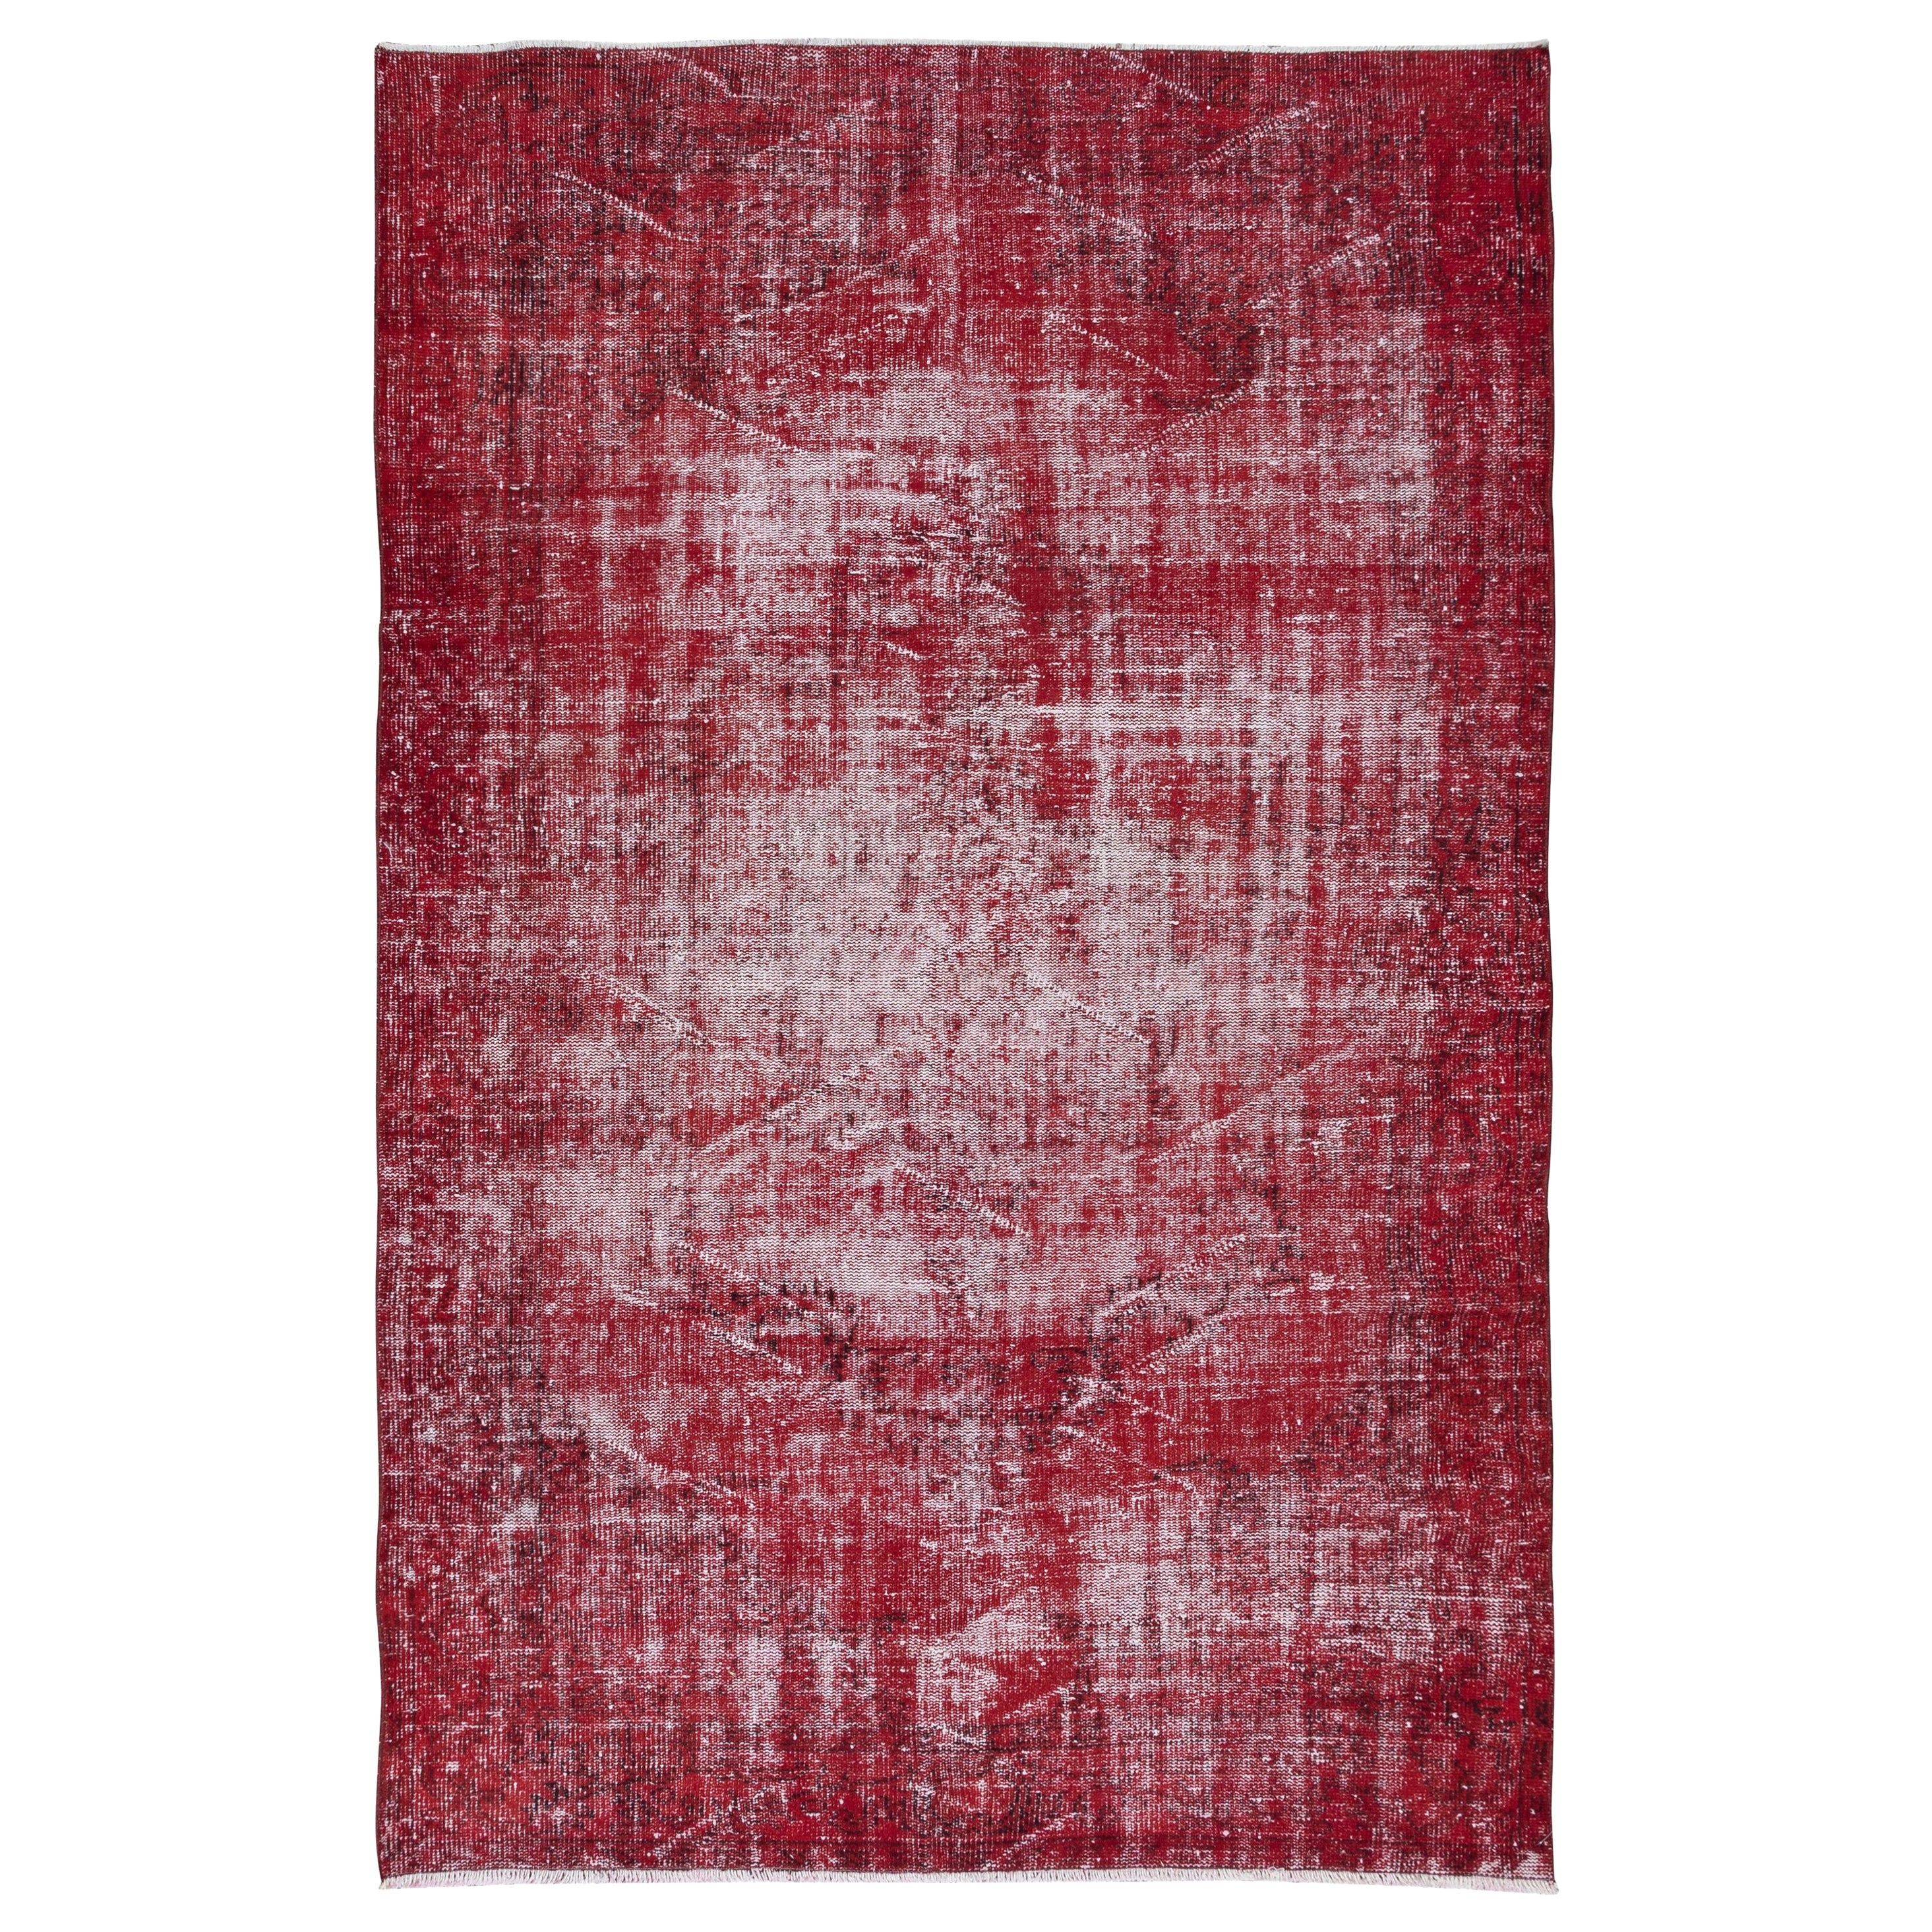 5.8x9 Ft Distressed Turkish Handmade Area Rug in Red, Ideal for Modern Interiors